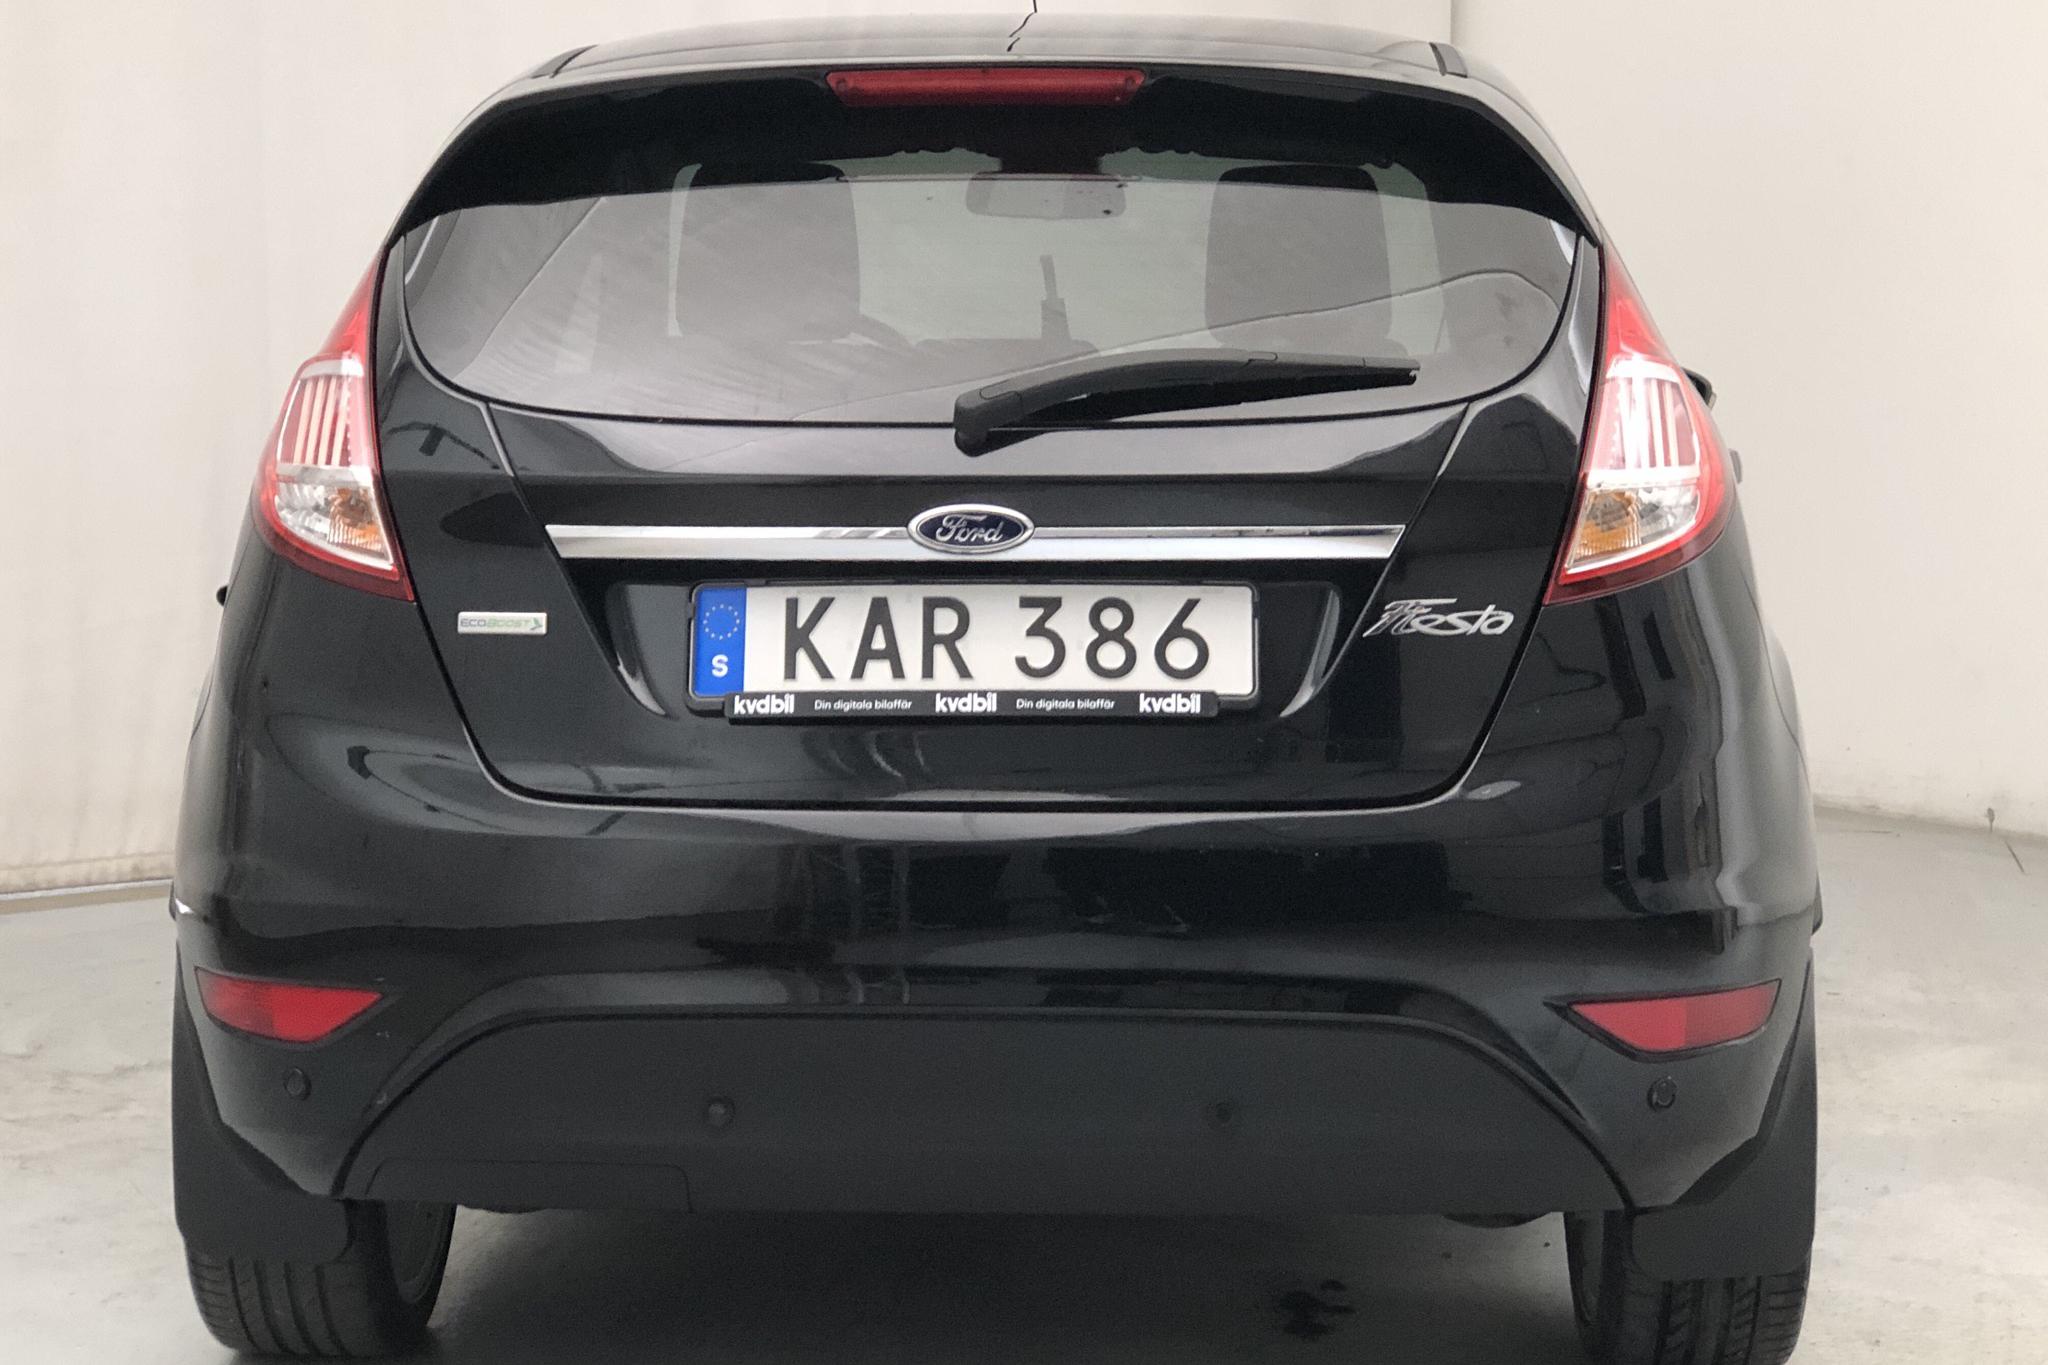 Ford Fiesta 1.0T EcoBoost 5dr (100hk) - 82 180 km - Automatic - black - 2016